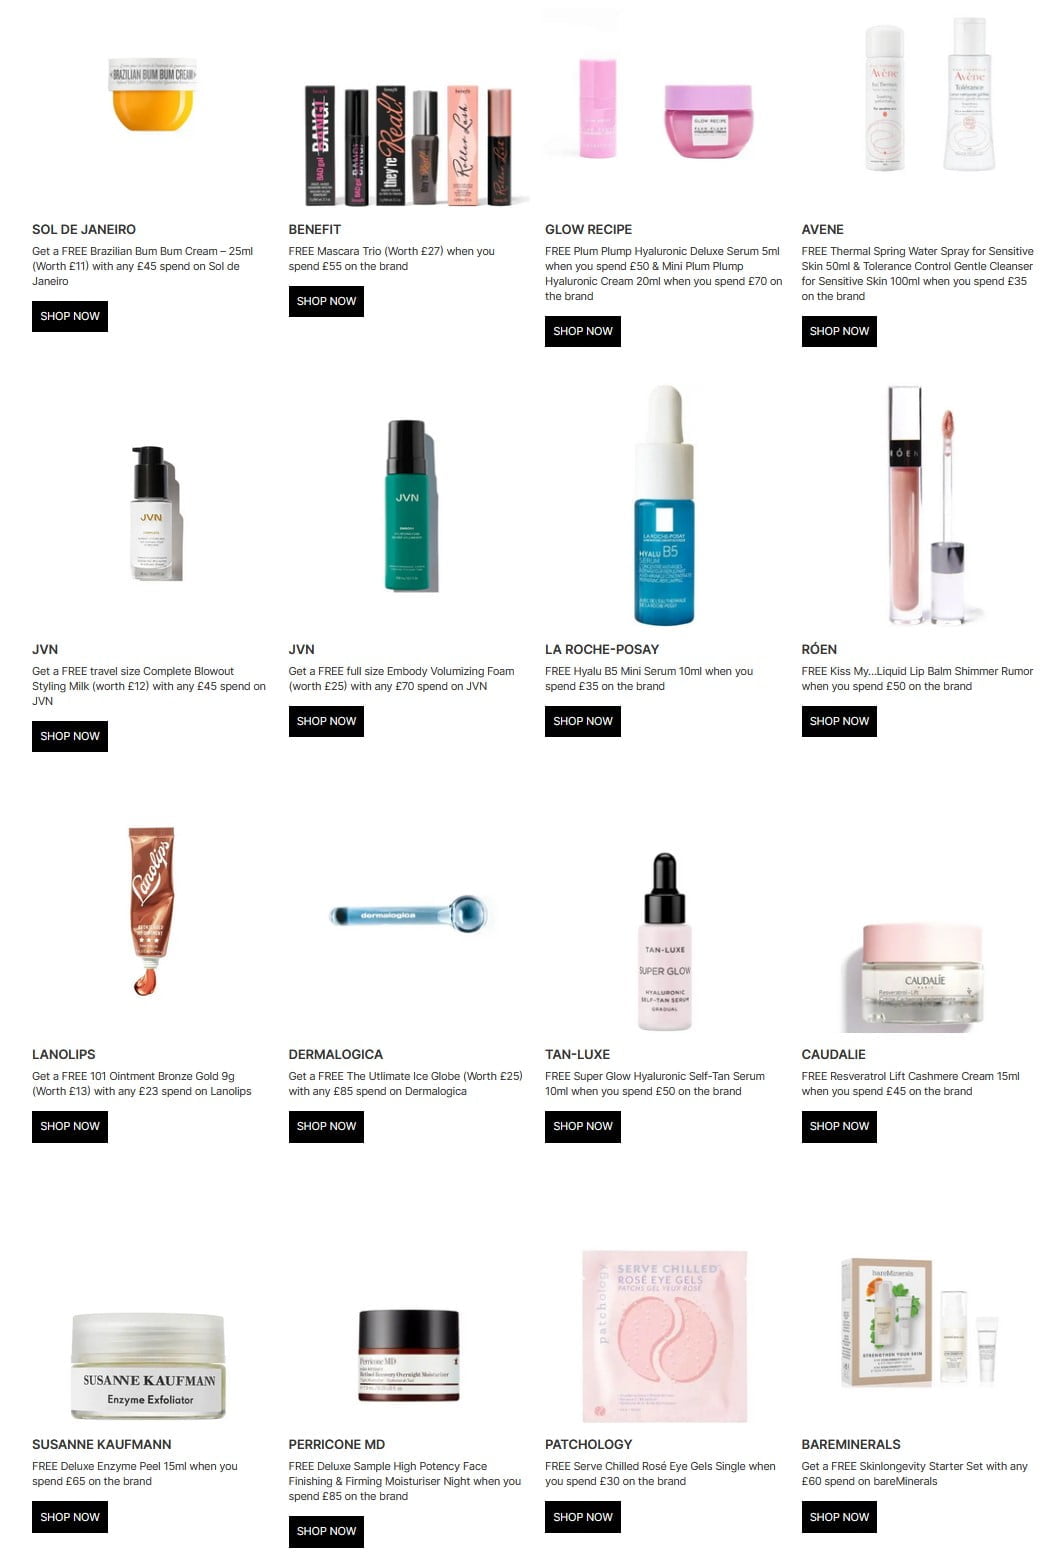 Gift with purchase offers at Cult Beauty